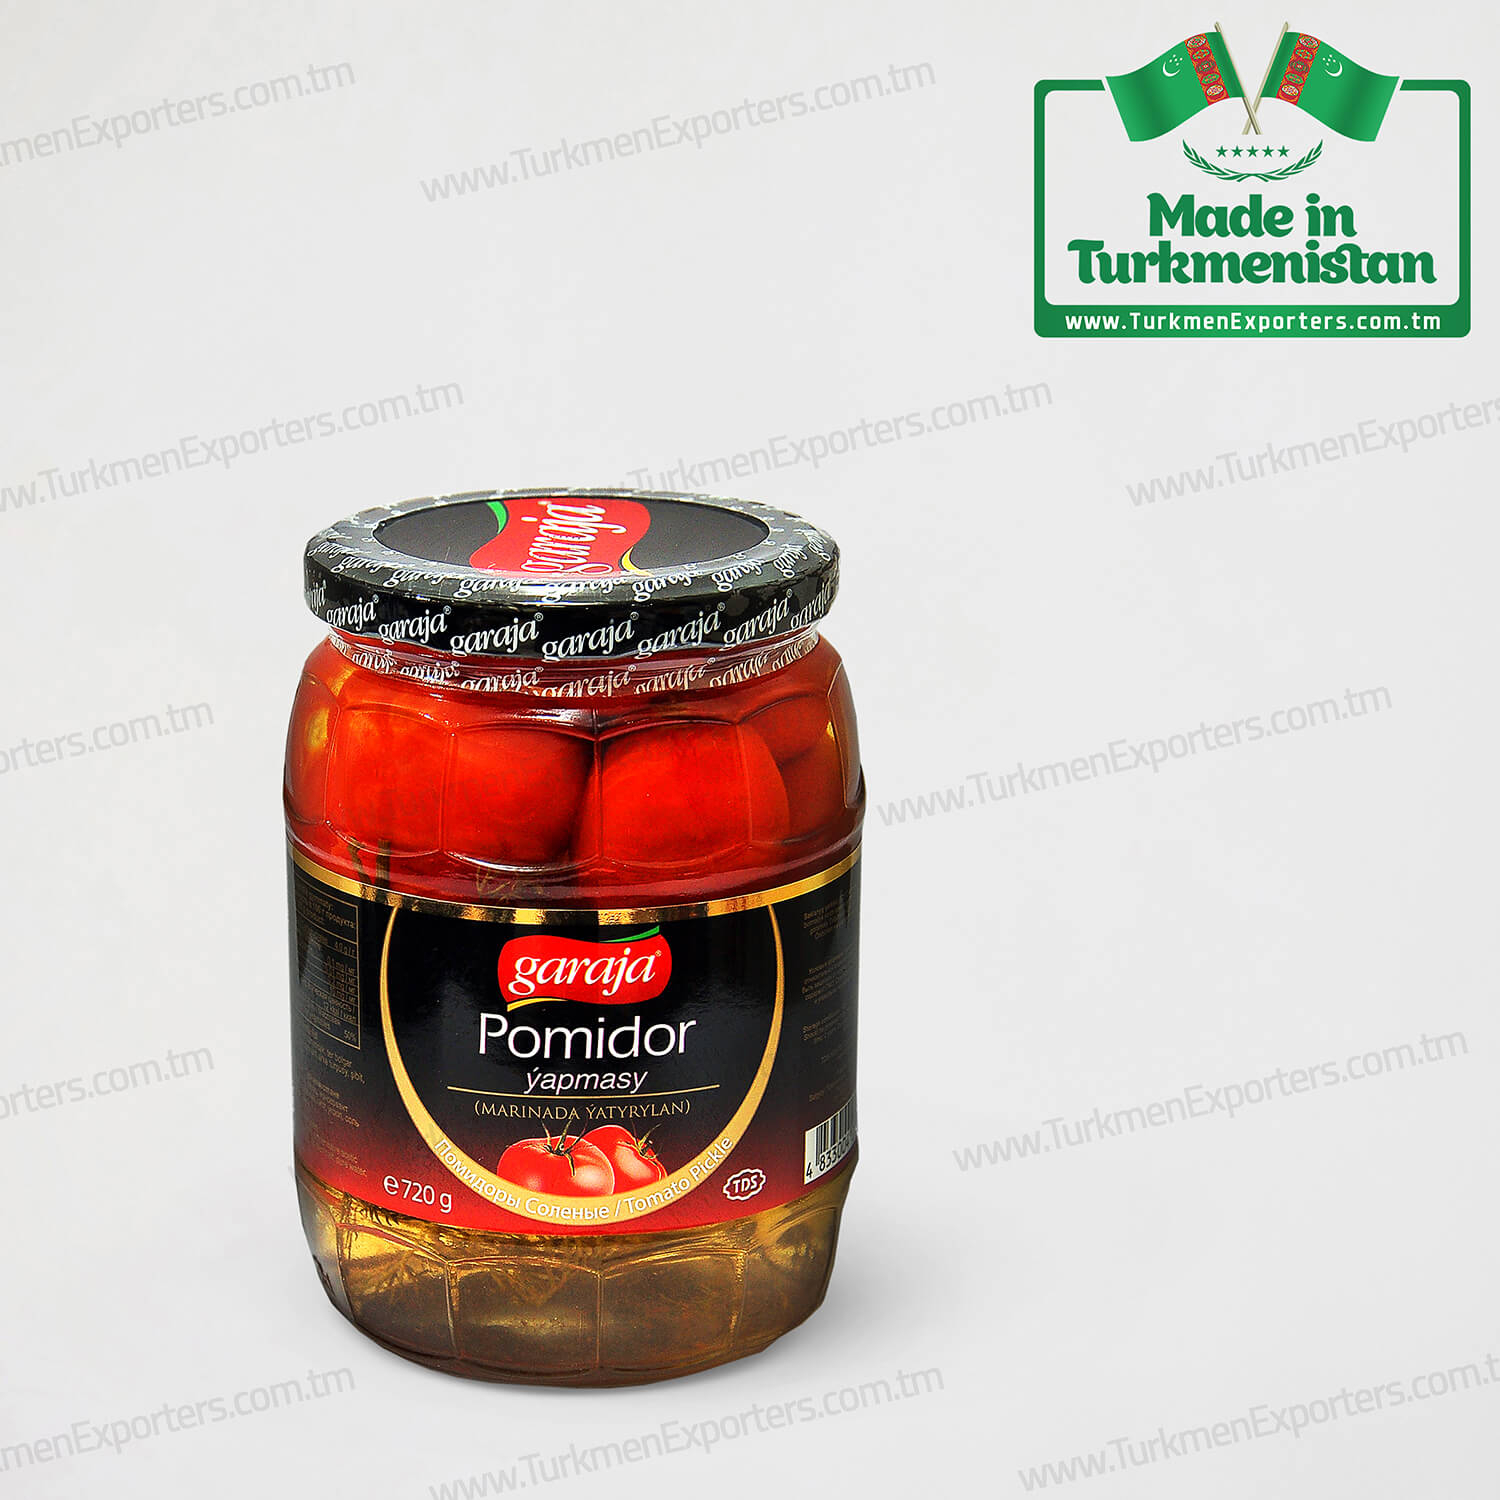 Tomato pickle Made in Turkmenistan | Yakyn Dost economic society